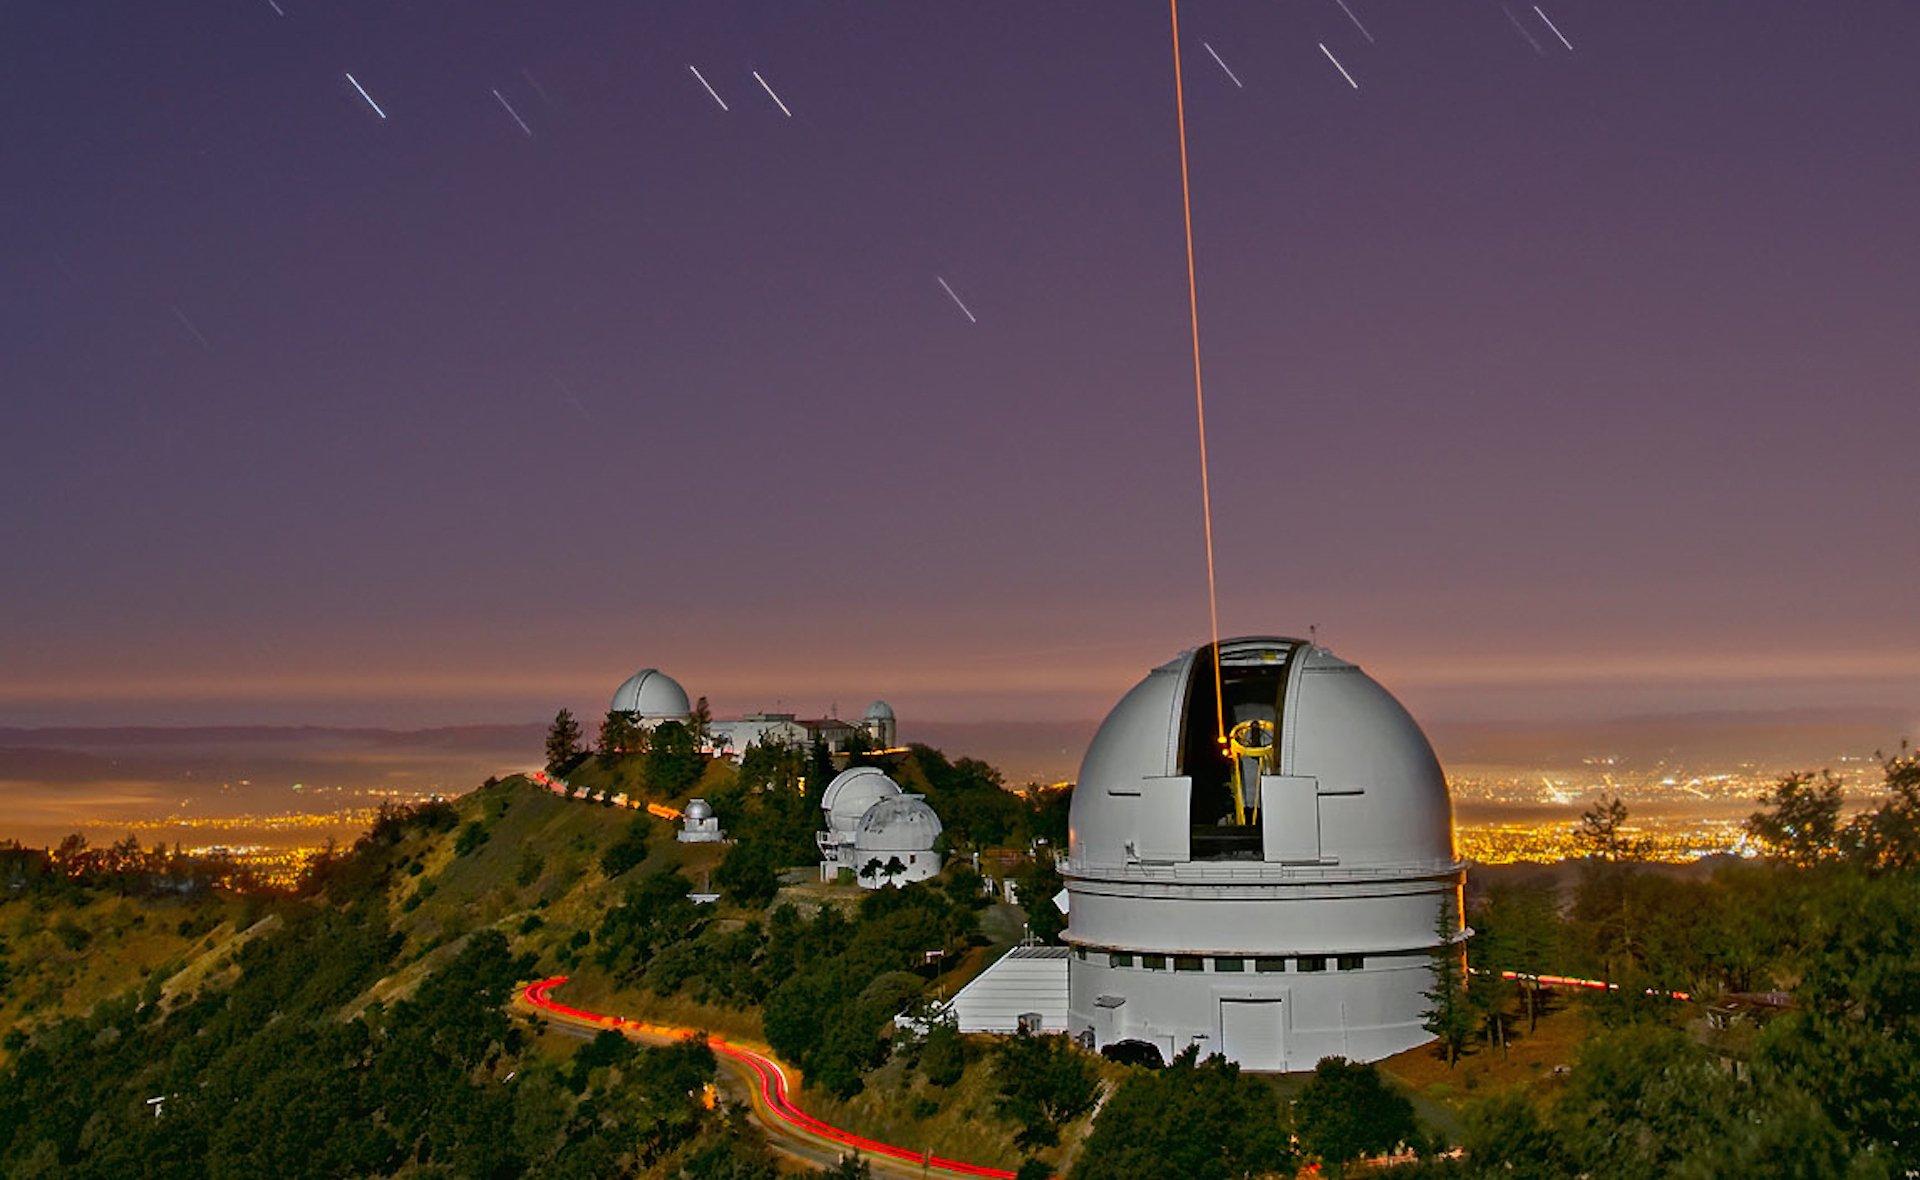 Tequila reccomend James lick observatory